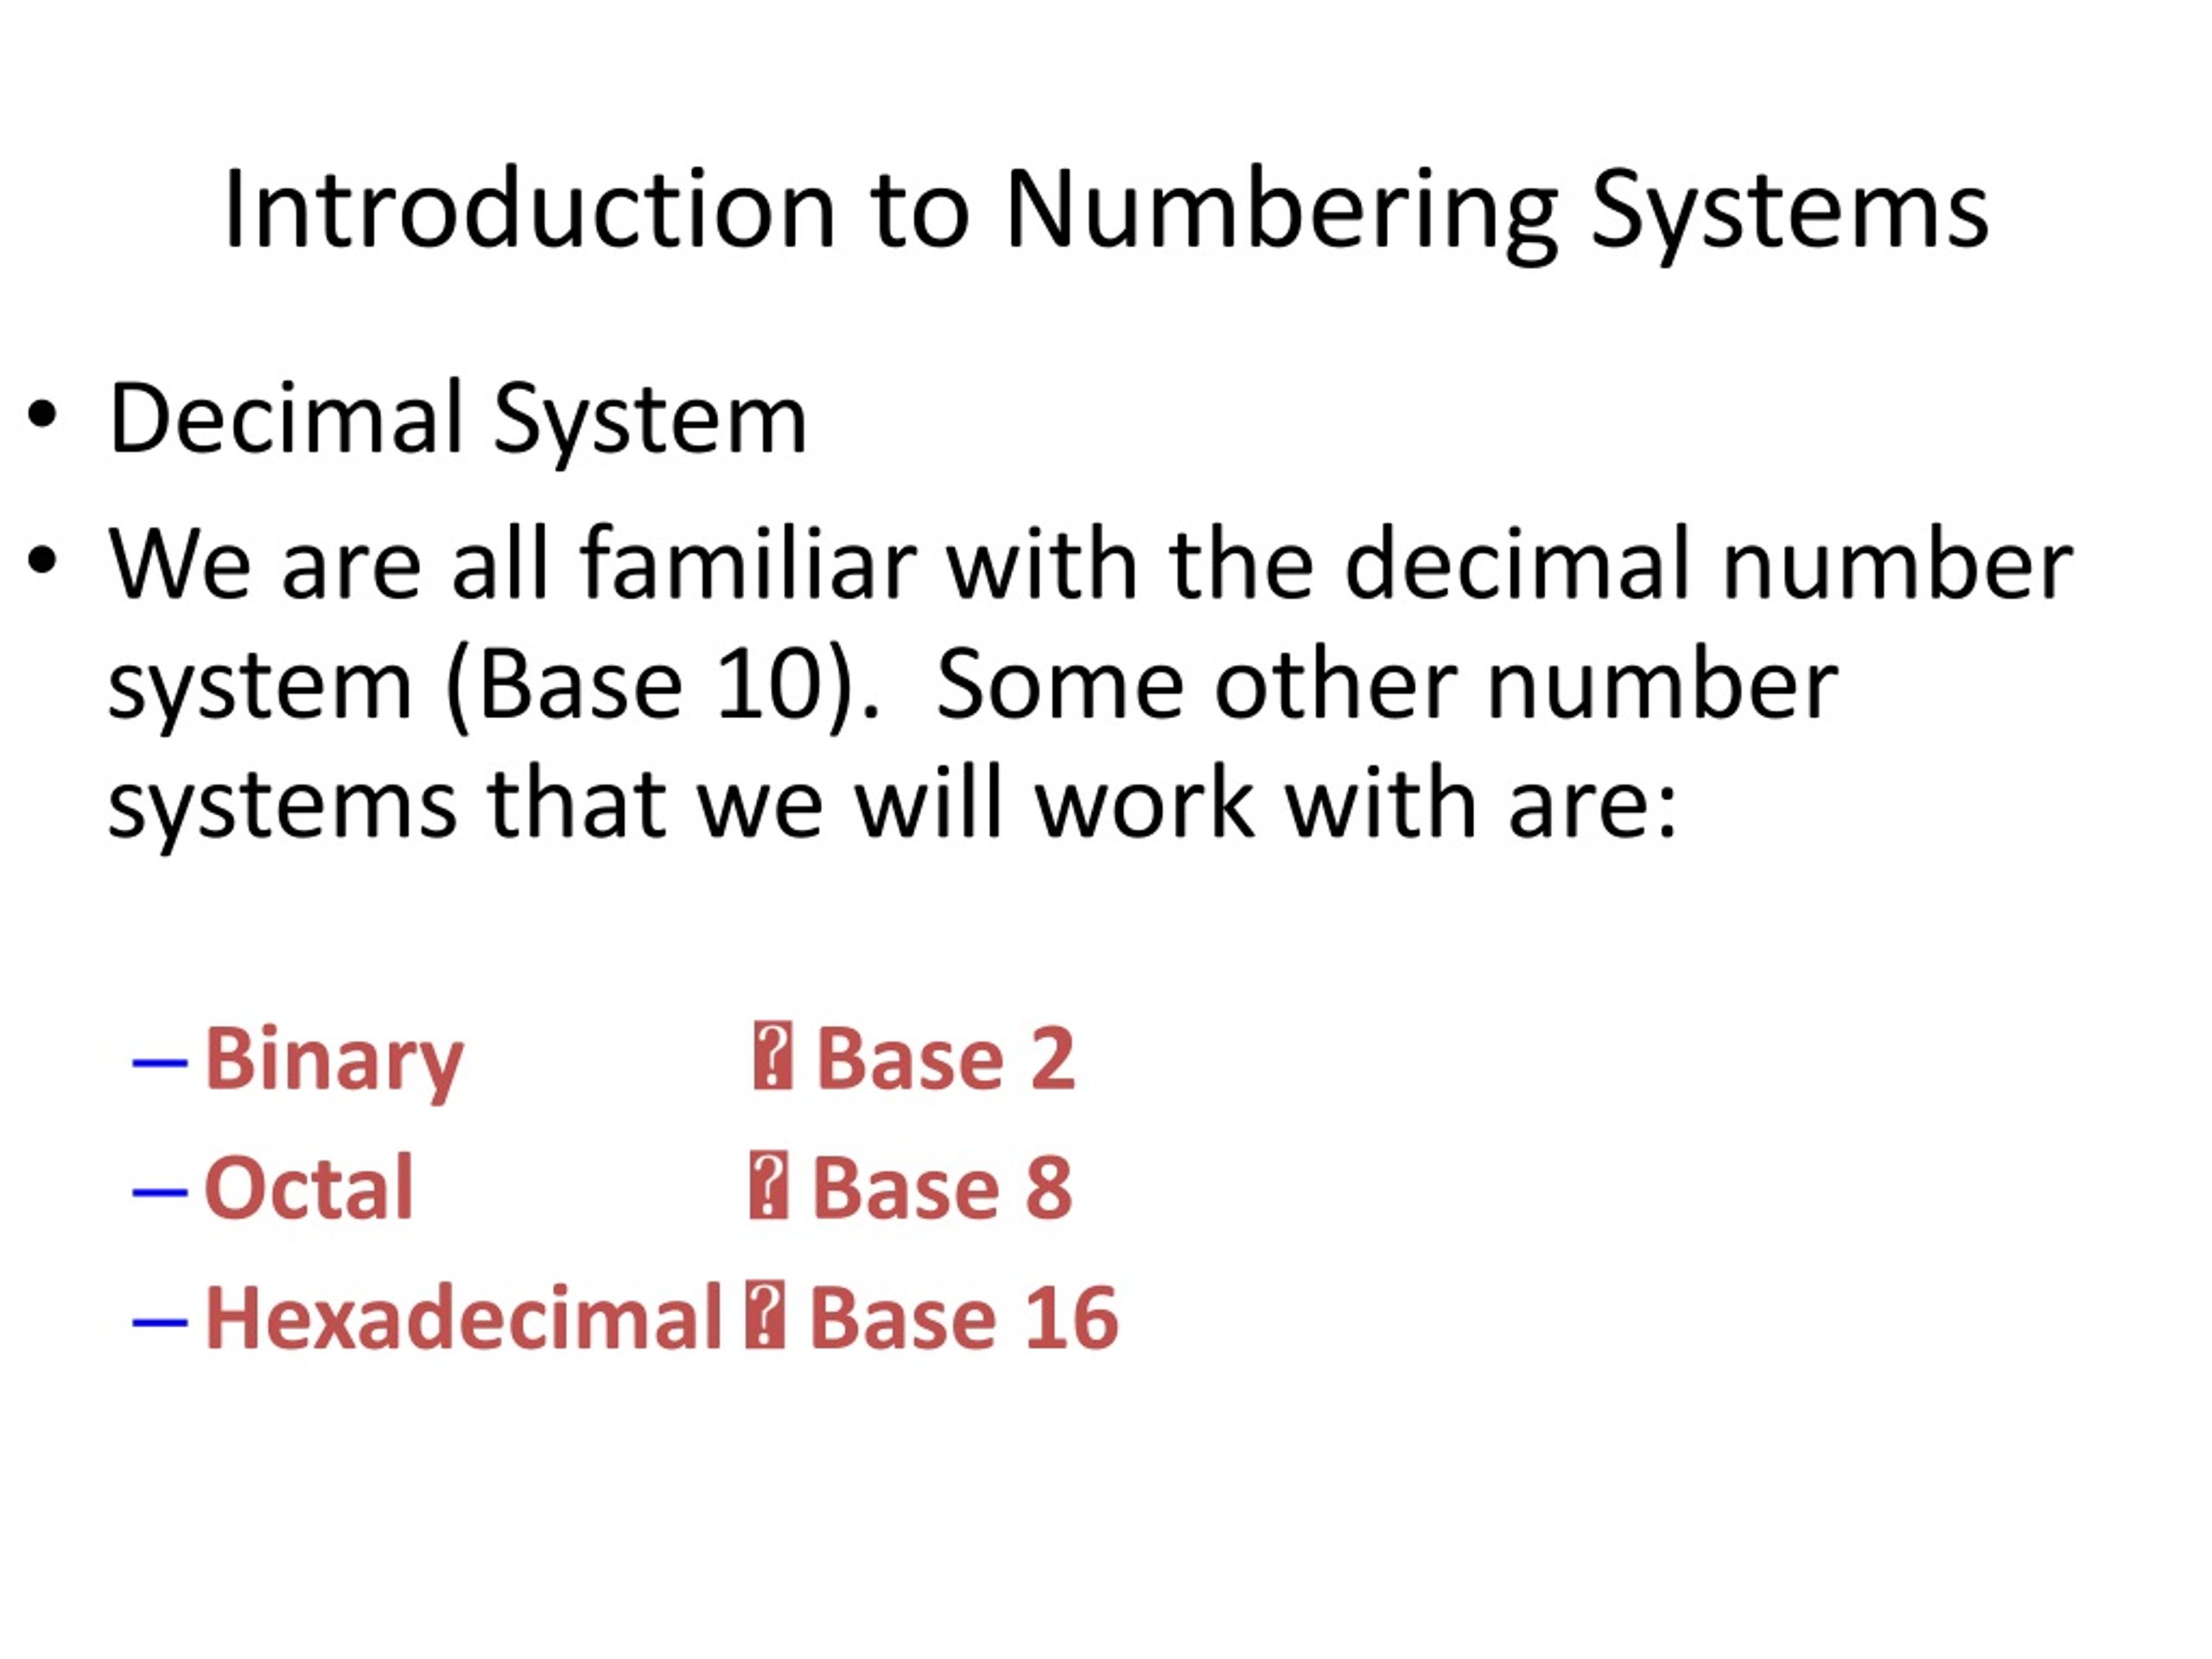 Ppt Numbering Systems Powerpoint Presentation Free Download Id9185061